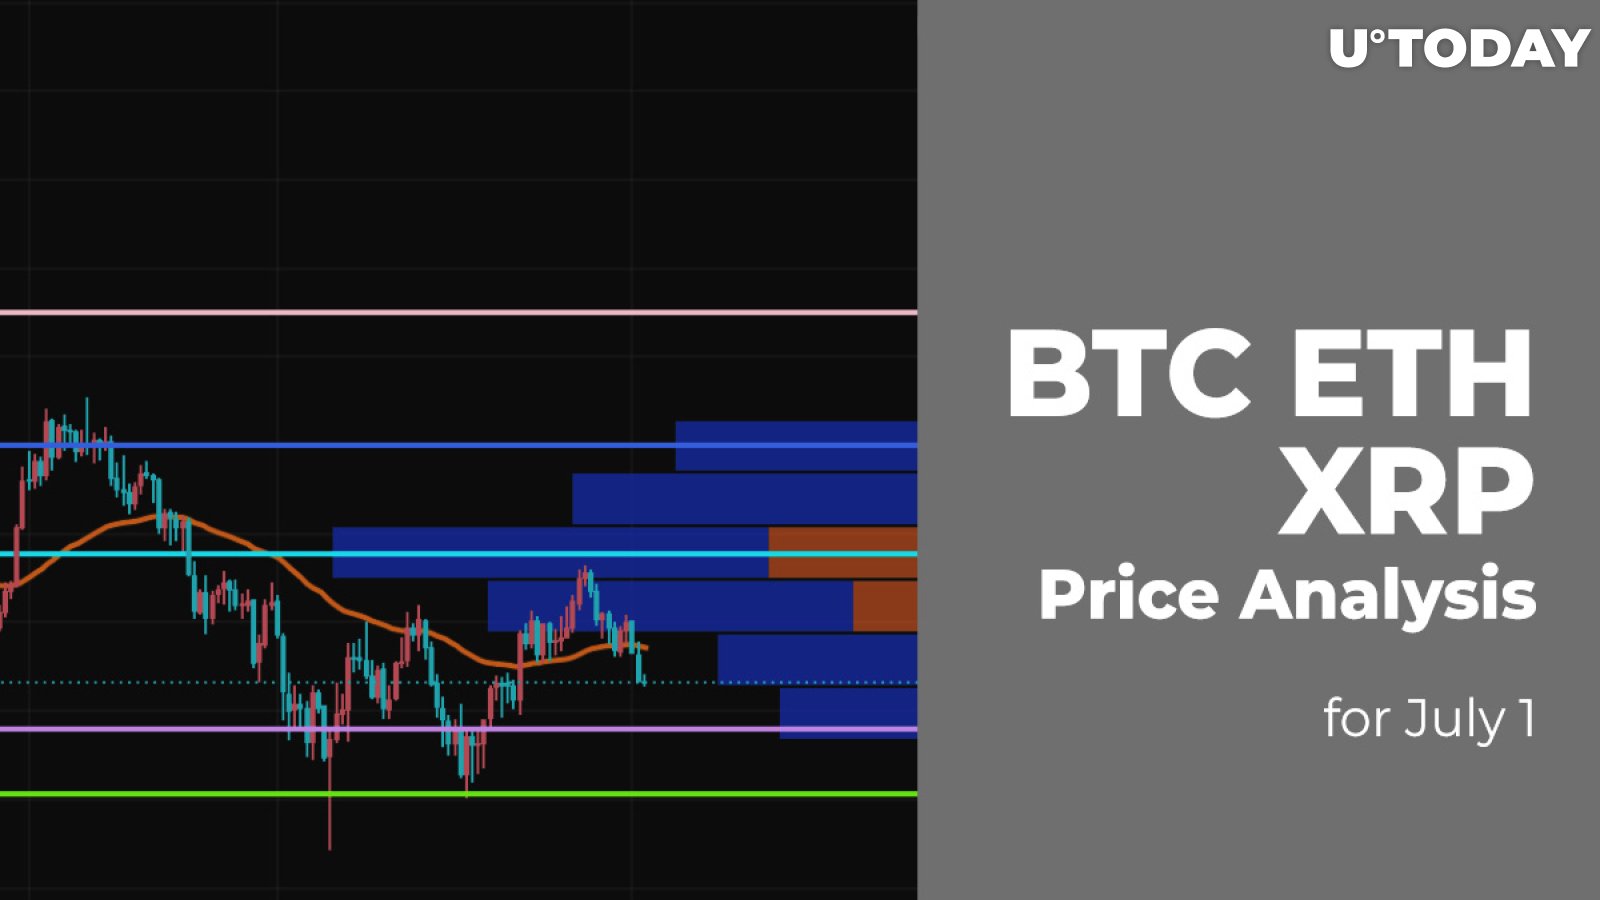 BTC, ETH, and XRP Price Analysis for July 1